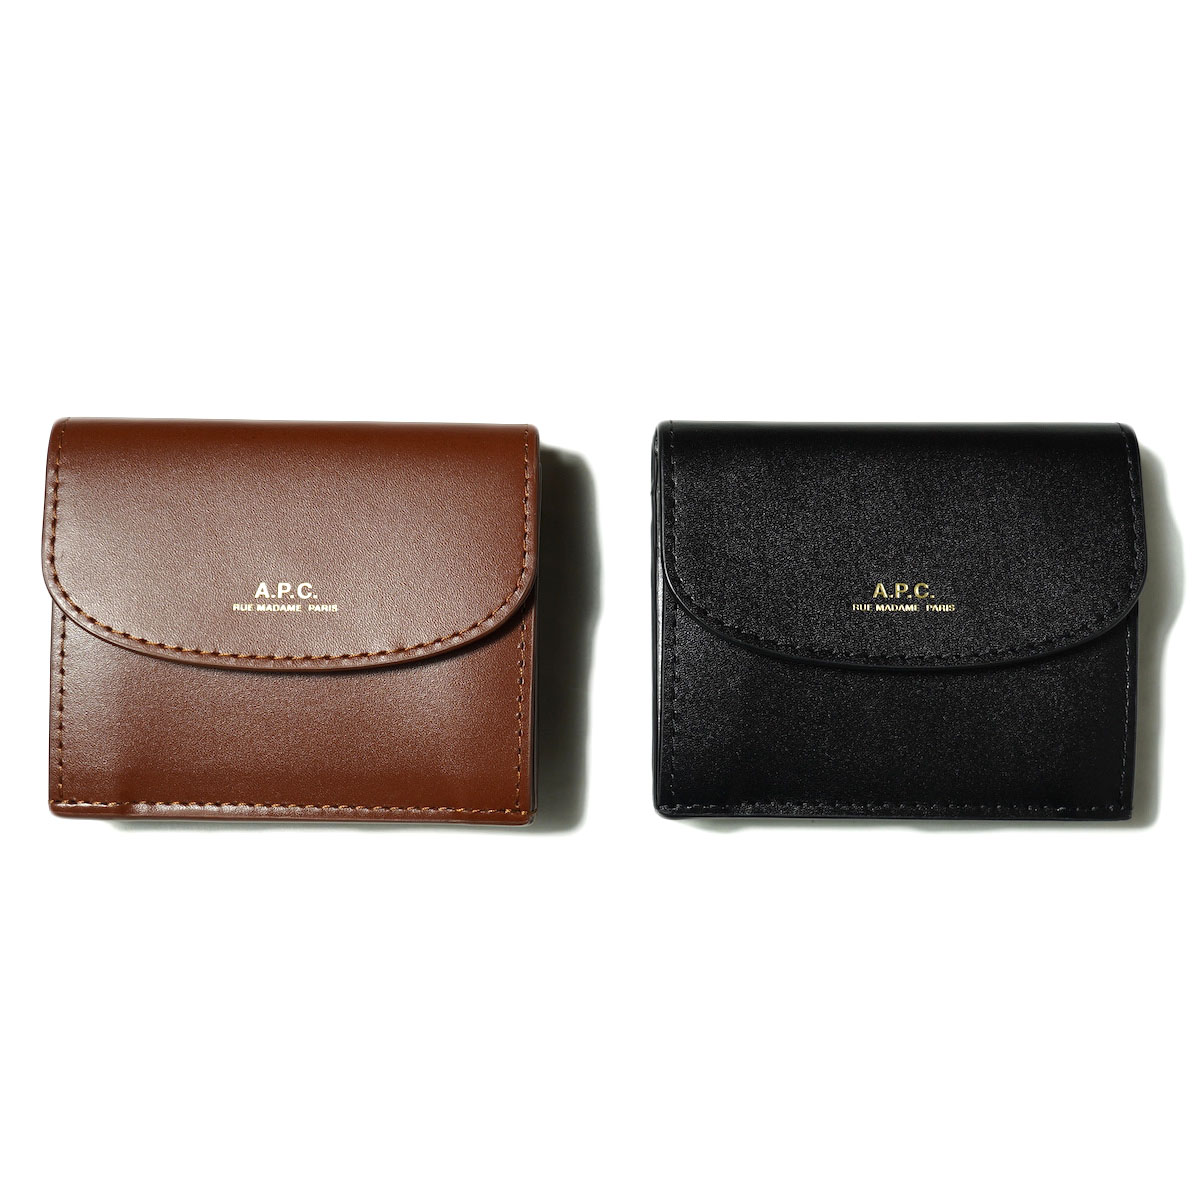 A.P.C. / Geneve Trifold Wallet